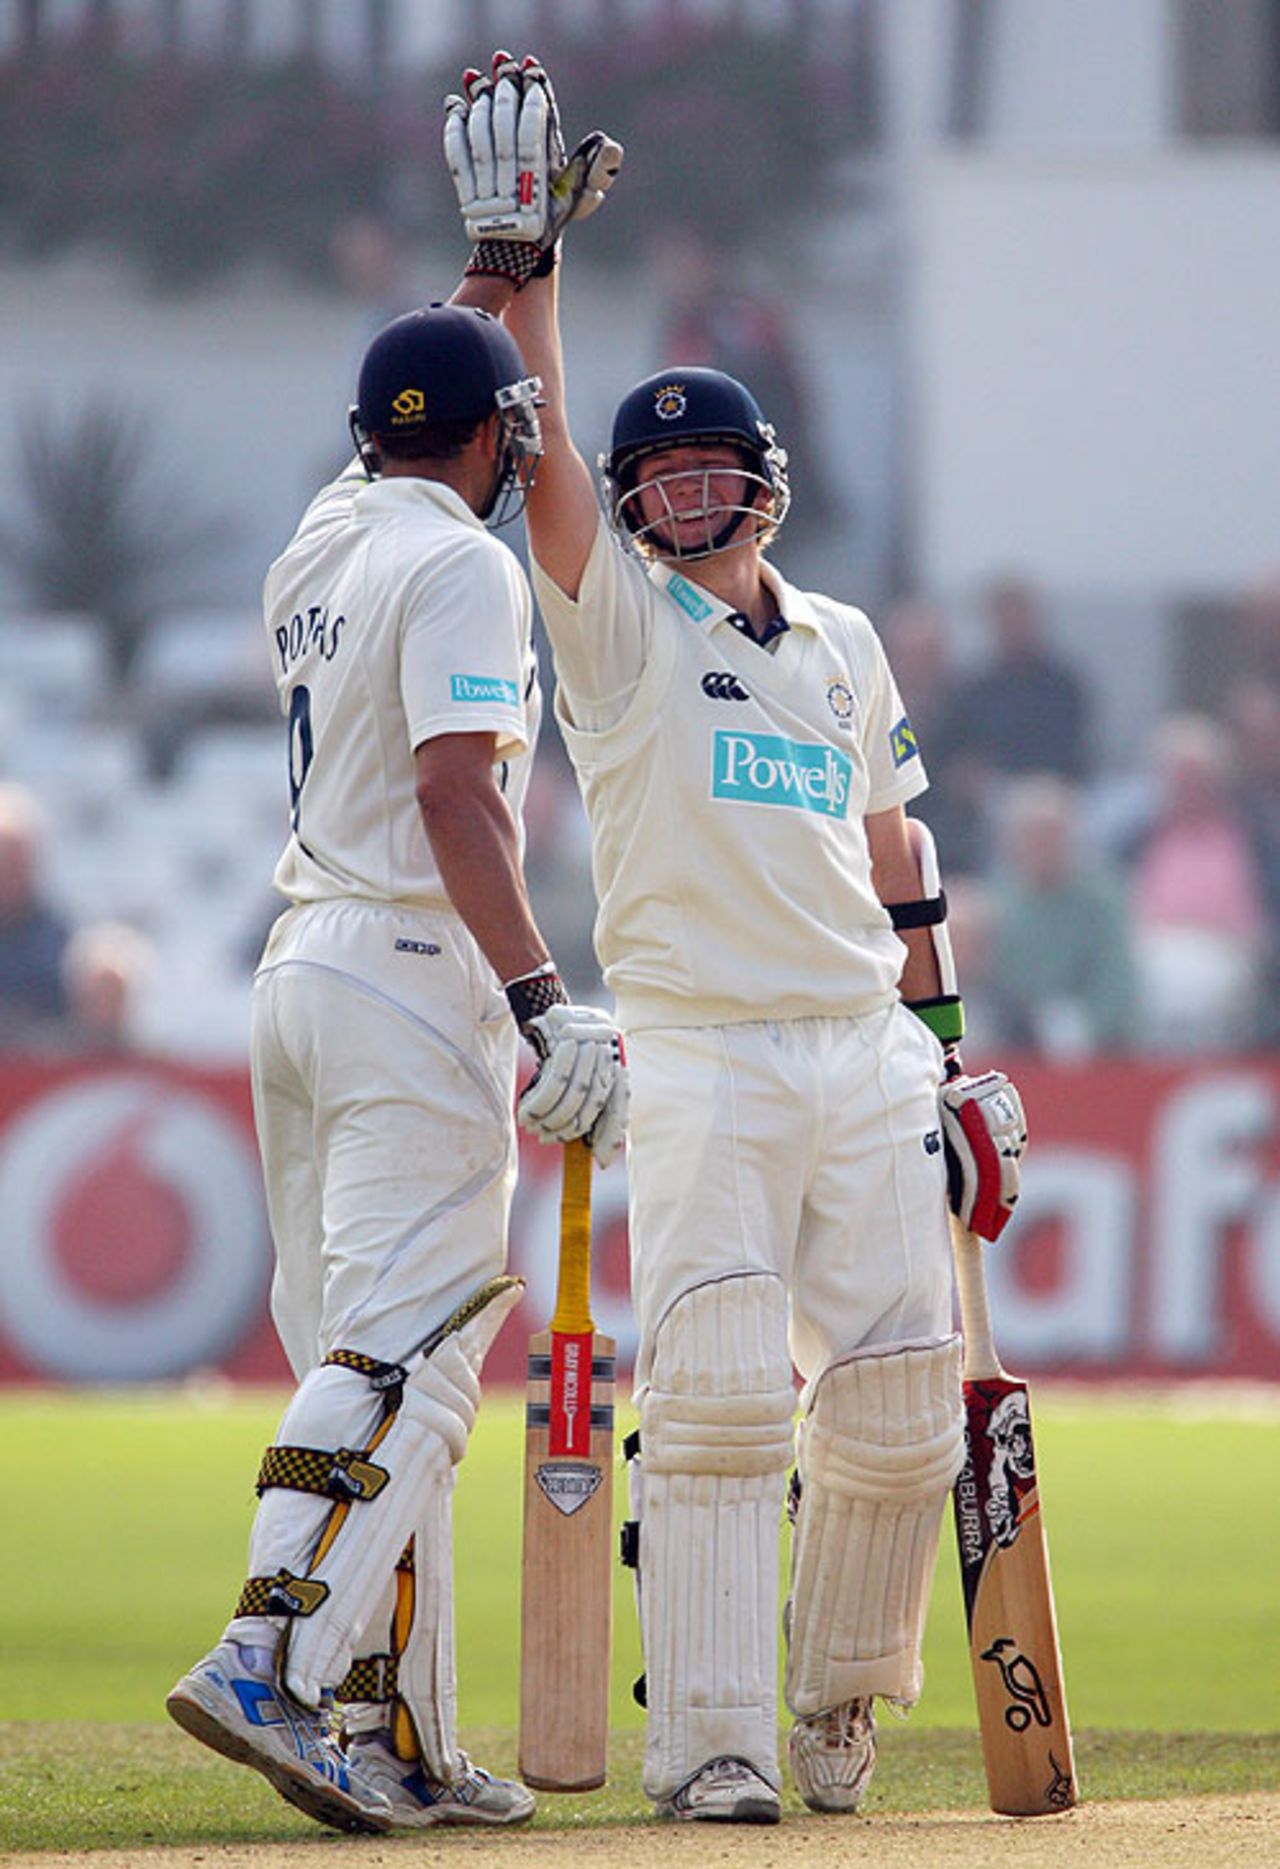 Nic Pothas congratulates Liam Dawson on his maiden first-class hundred, Nottinghamshire v Hampshire, County Championship, September 25, 2008